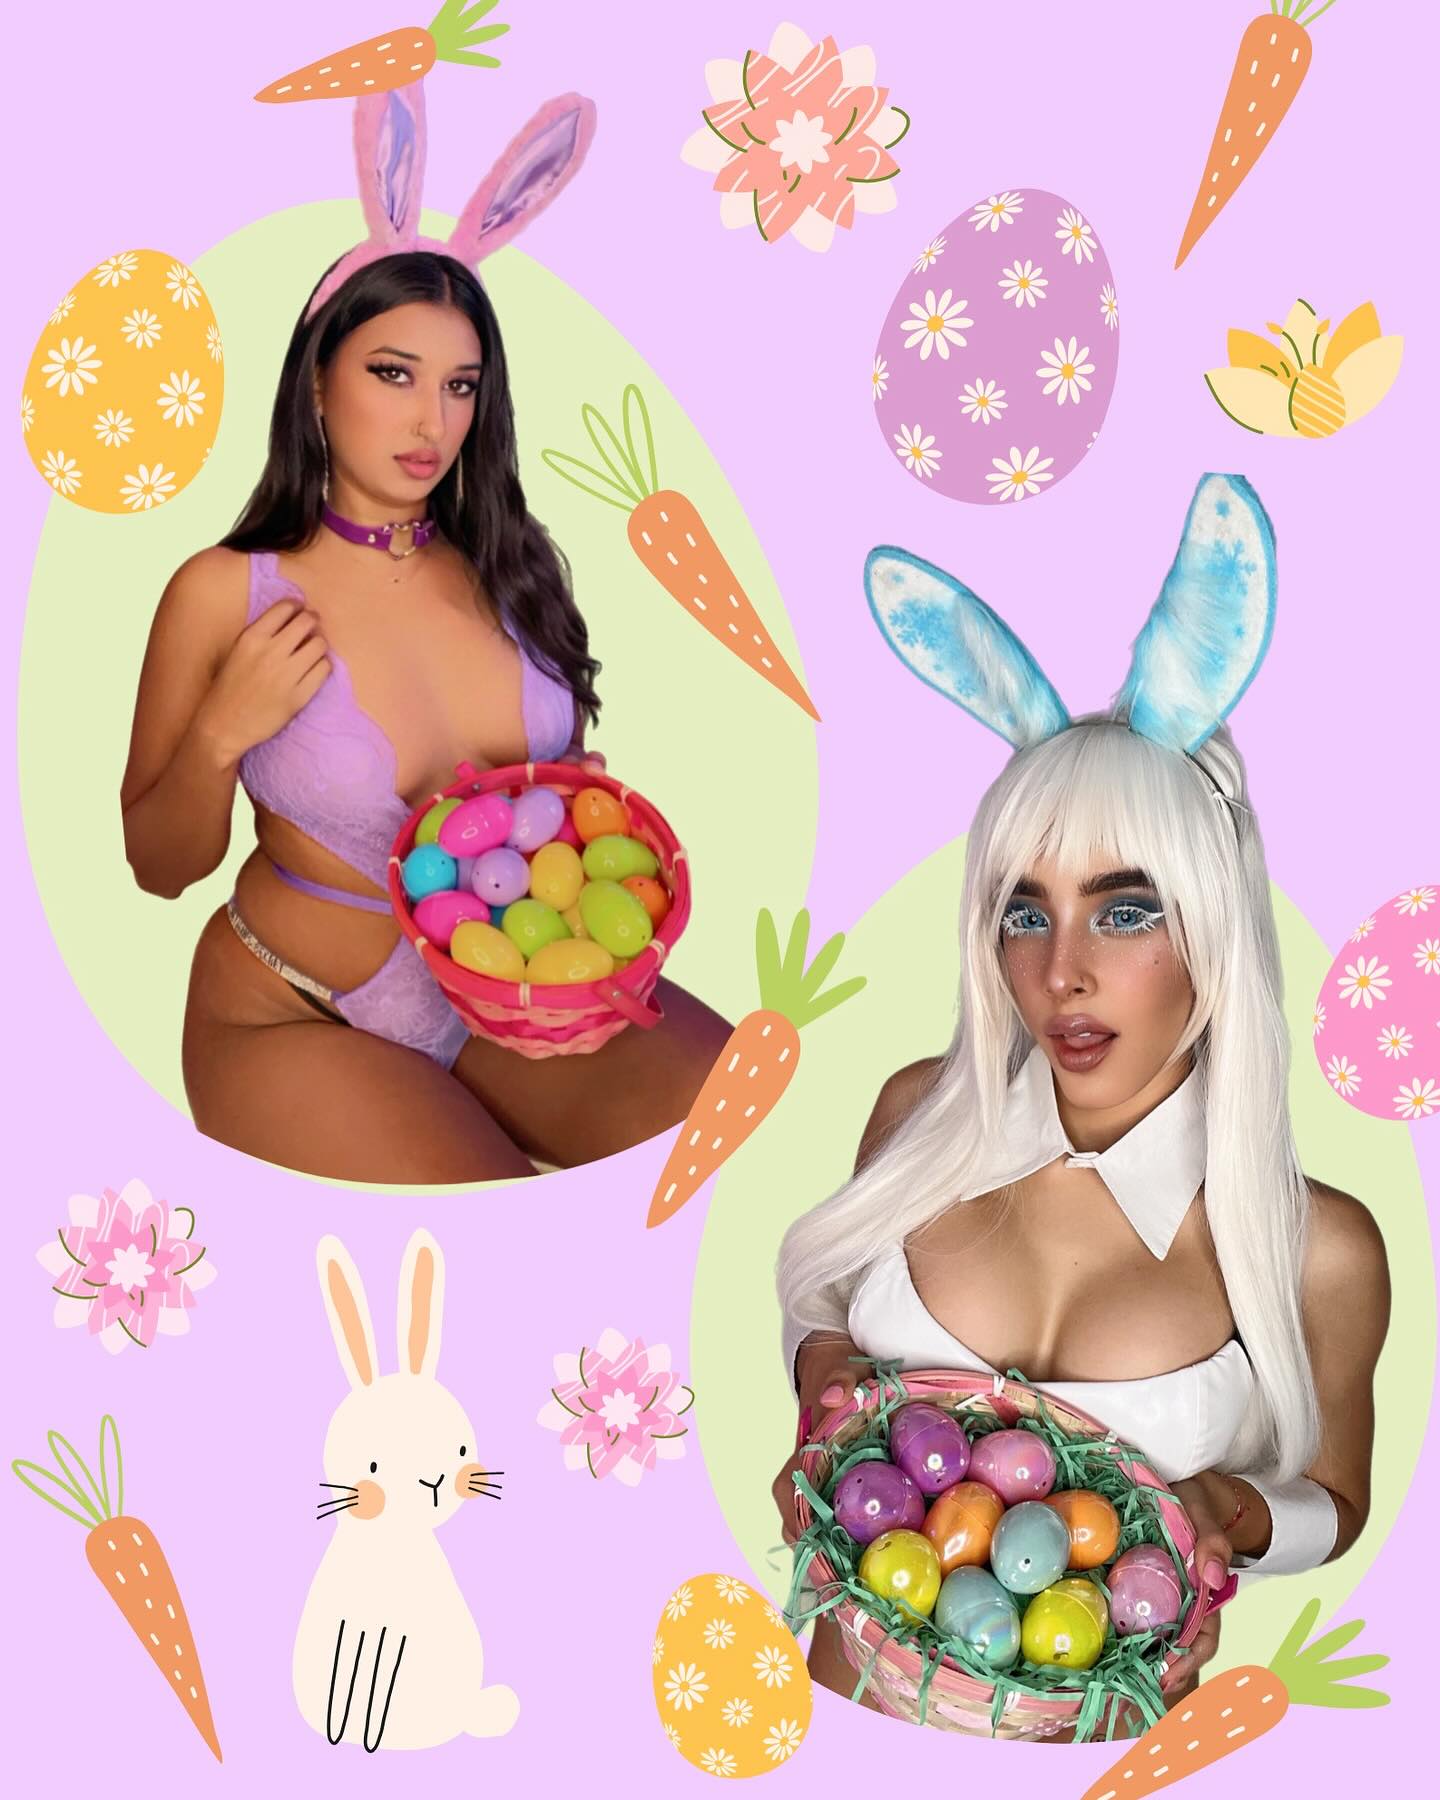 🐇💕🐰 It’s bunny season!!! 🐰💕🐇
Really excited to share this Easter bunny collab with everyone. 😍 The theme was COLORS 🎨 🌈 Hope you enjoy this as much as we did while creating it! Be sure to swipe through to see everyone’s beautiful bunnies!!! 🐰
.
🤍💙 Only a few of my pics are shared here. Be sure to join my 🍮 site for the full photoset plus videos! 💙🤍
.
📸 Photographer for my photos: @metalhoos
.
🐰 All the models:
@city.alien
@pearlpeony
@cucumbercosplay
@sheythegayy
@c_ntamination
@charanneloves
@ichinosekotomy
@carool.moonpr
___________________
#bunnygirl #bunnygirlcosplay #bunnycostume #bunnycosplay #kawaii #moegirl #kawaiigirl #animegirl #cosplaygirls #cosplaygirl #cosplayersofinstagram #kemonomimi #usamimi